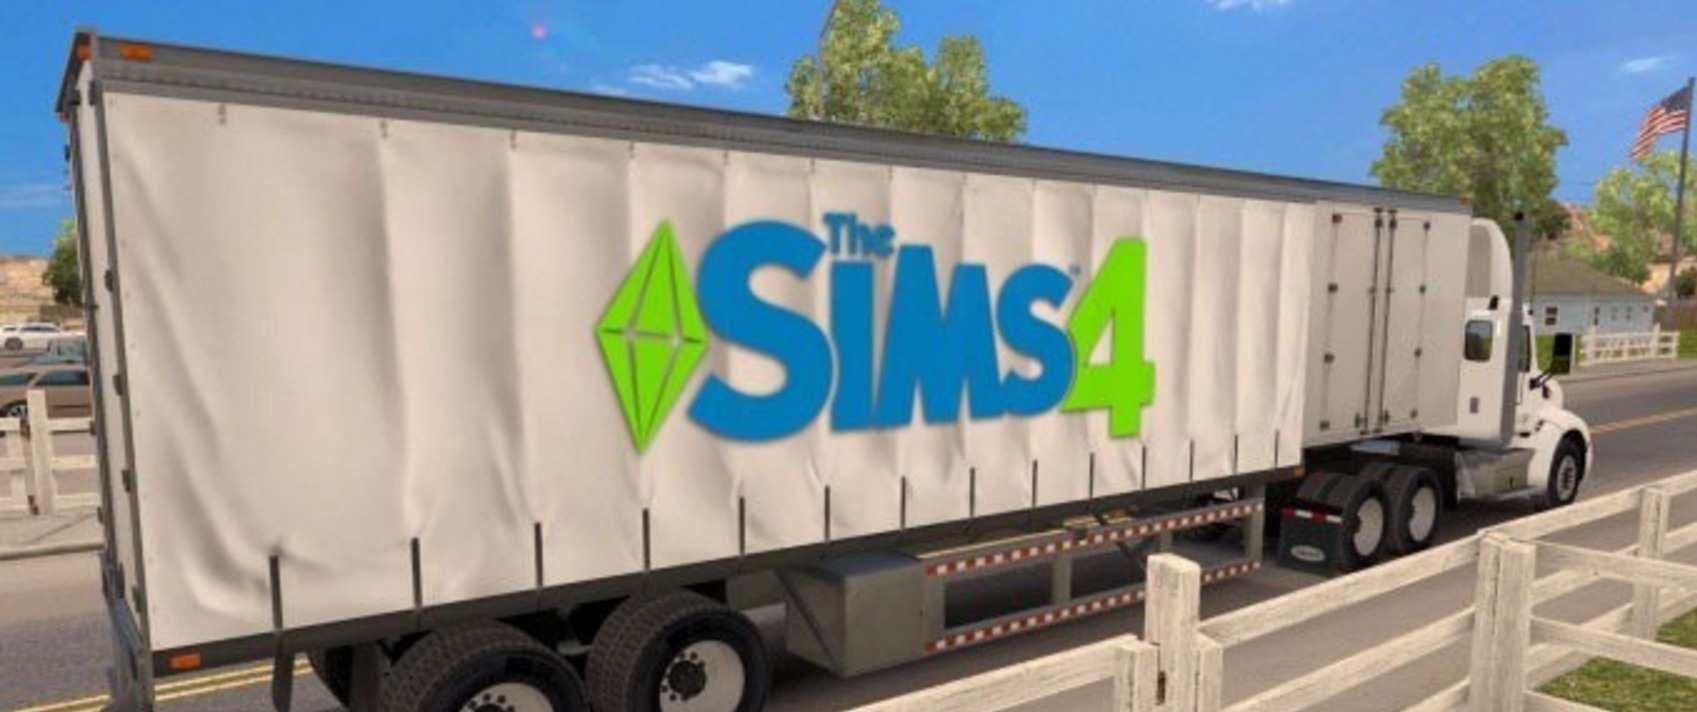 The Sims 4 Trailer